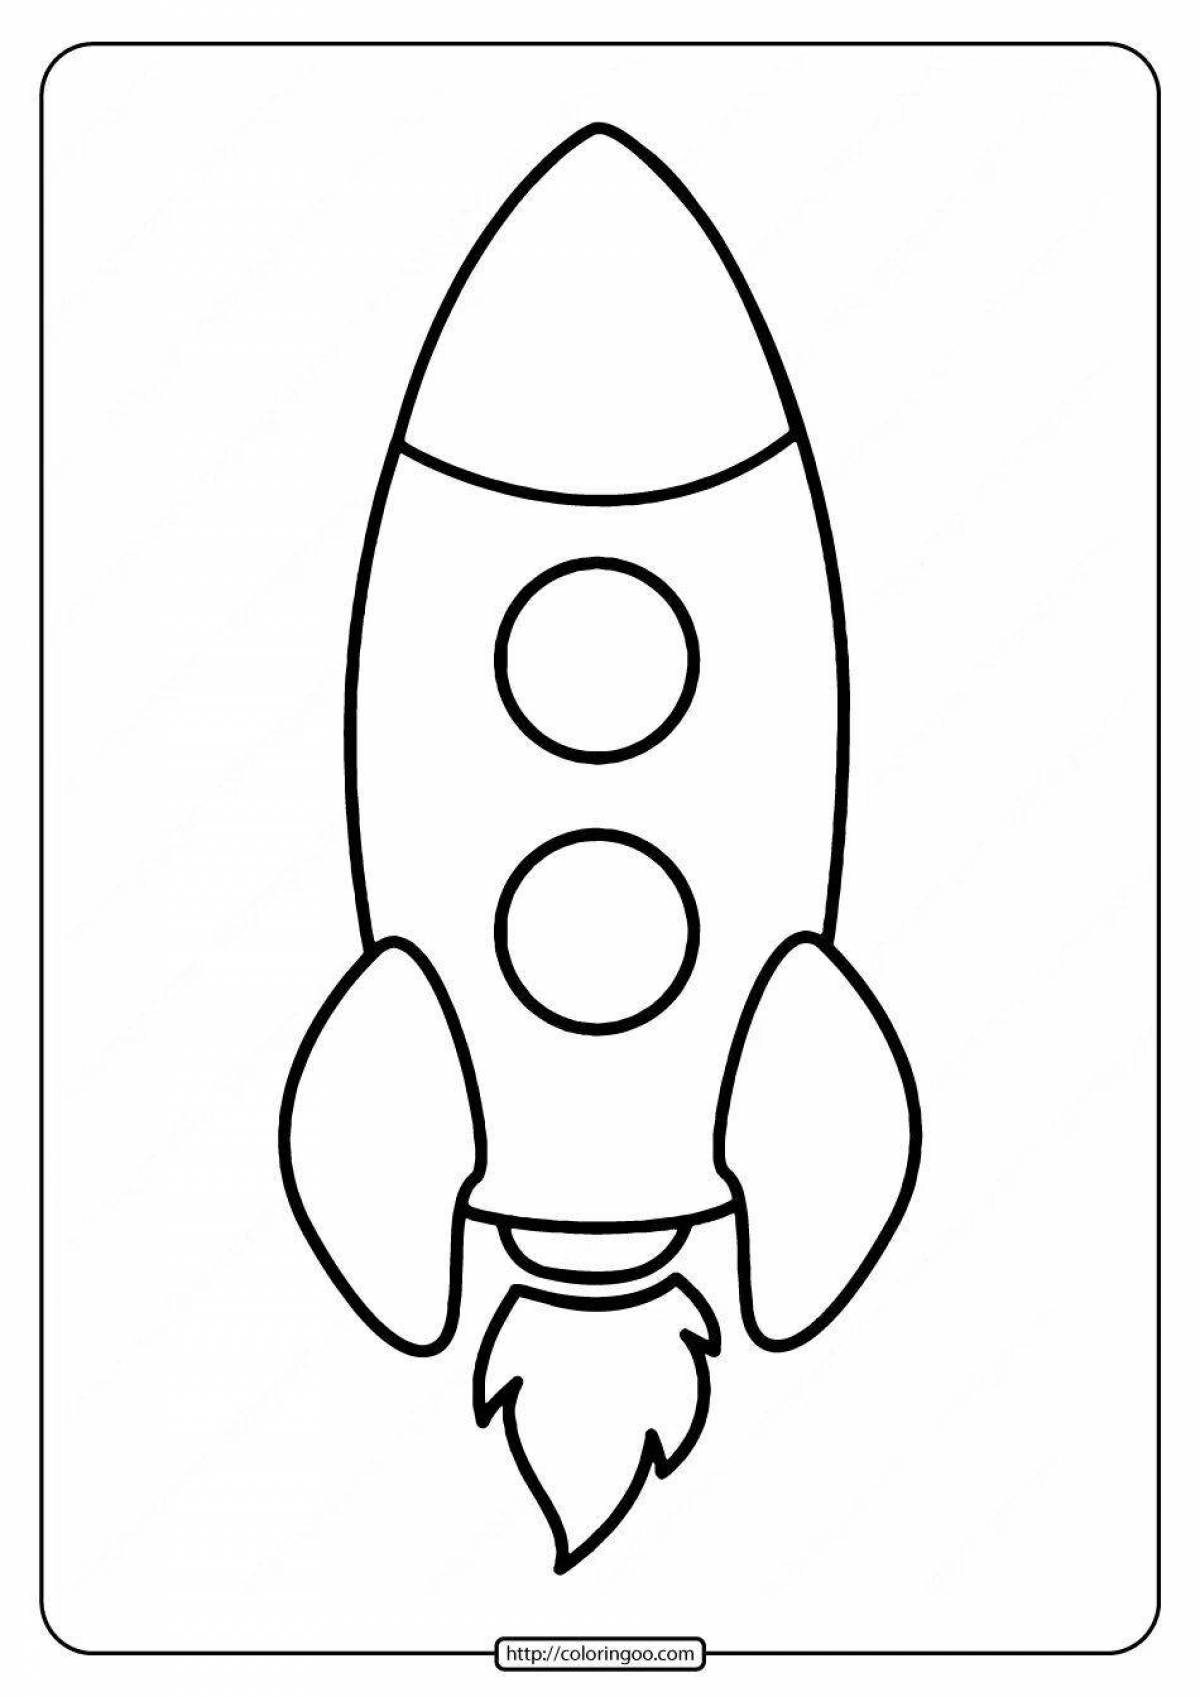 Cute rocket coloring book for kids